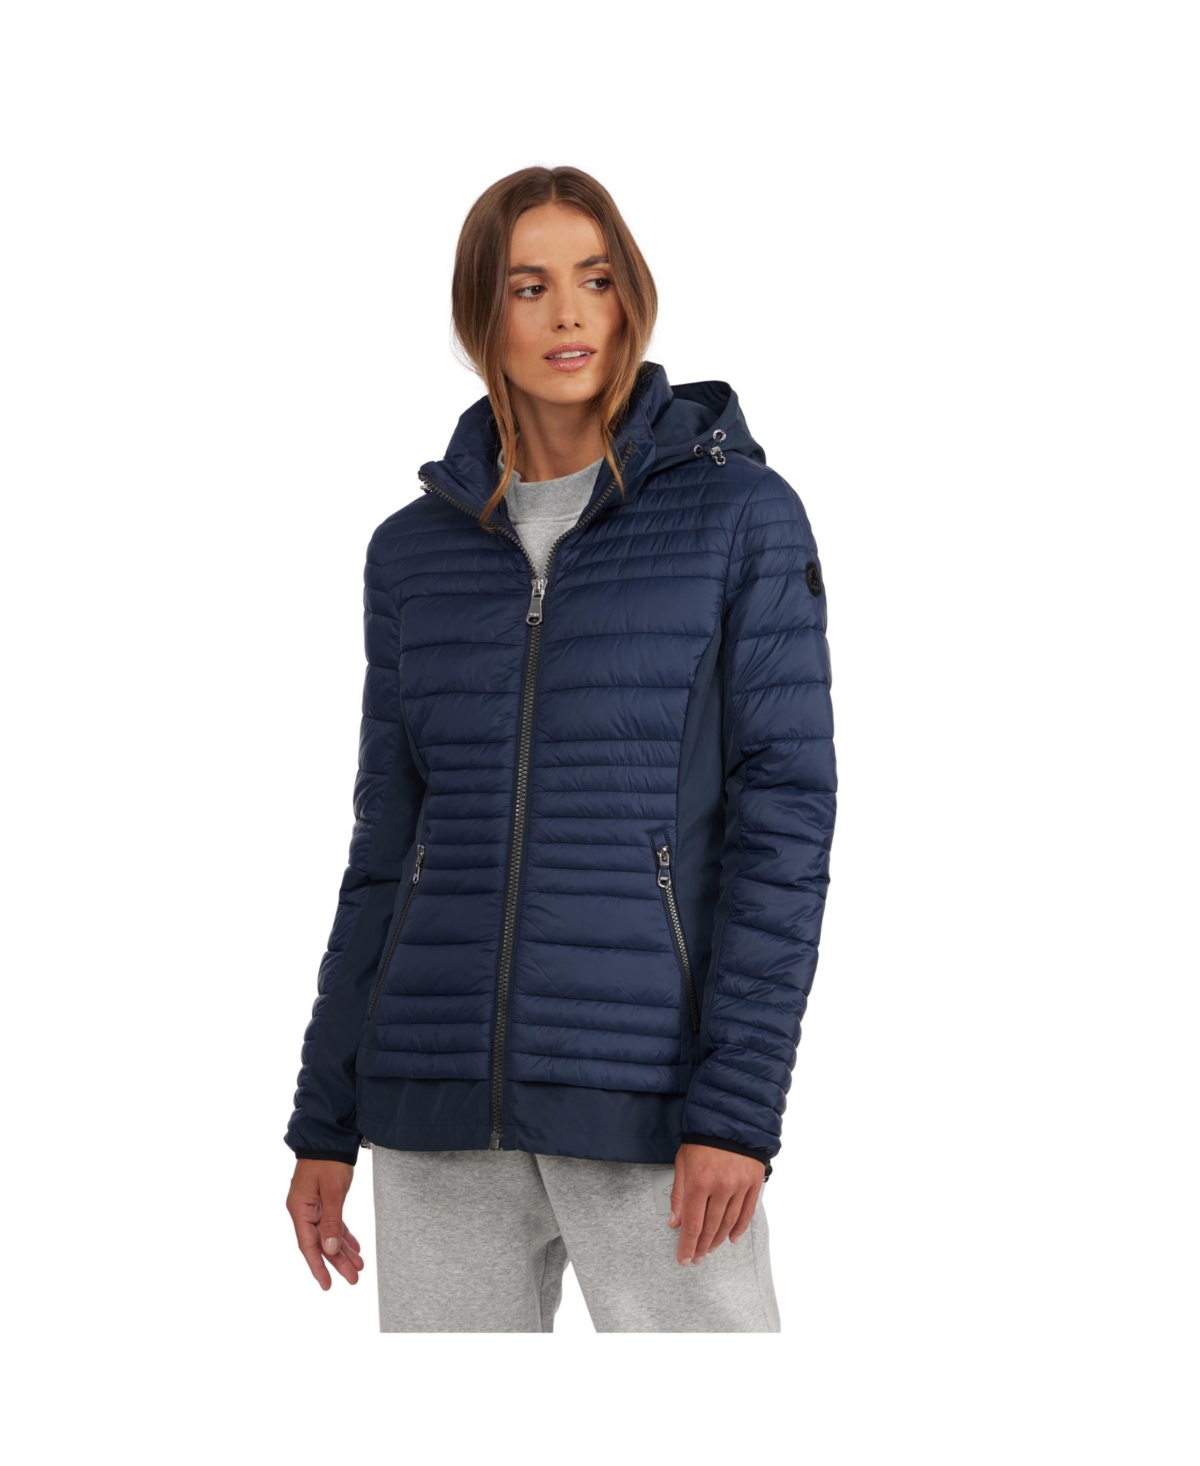 Women's Makani Ladies Channel Quilted Light Weight Mixed Media Jacket - Navy